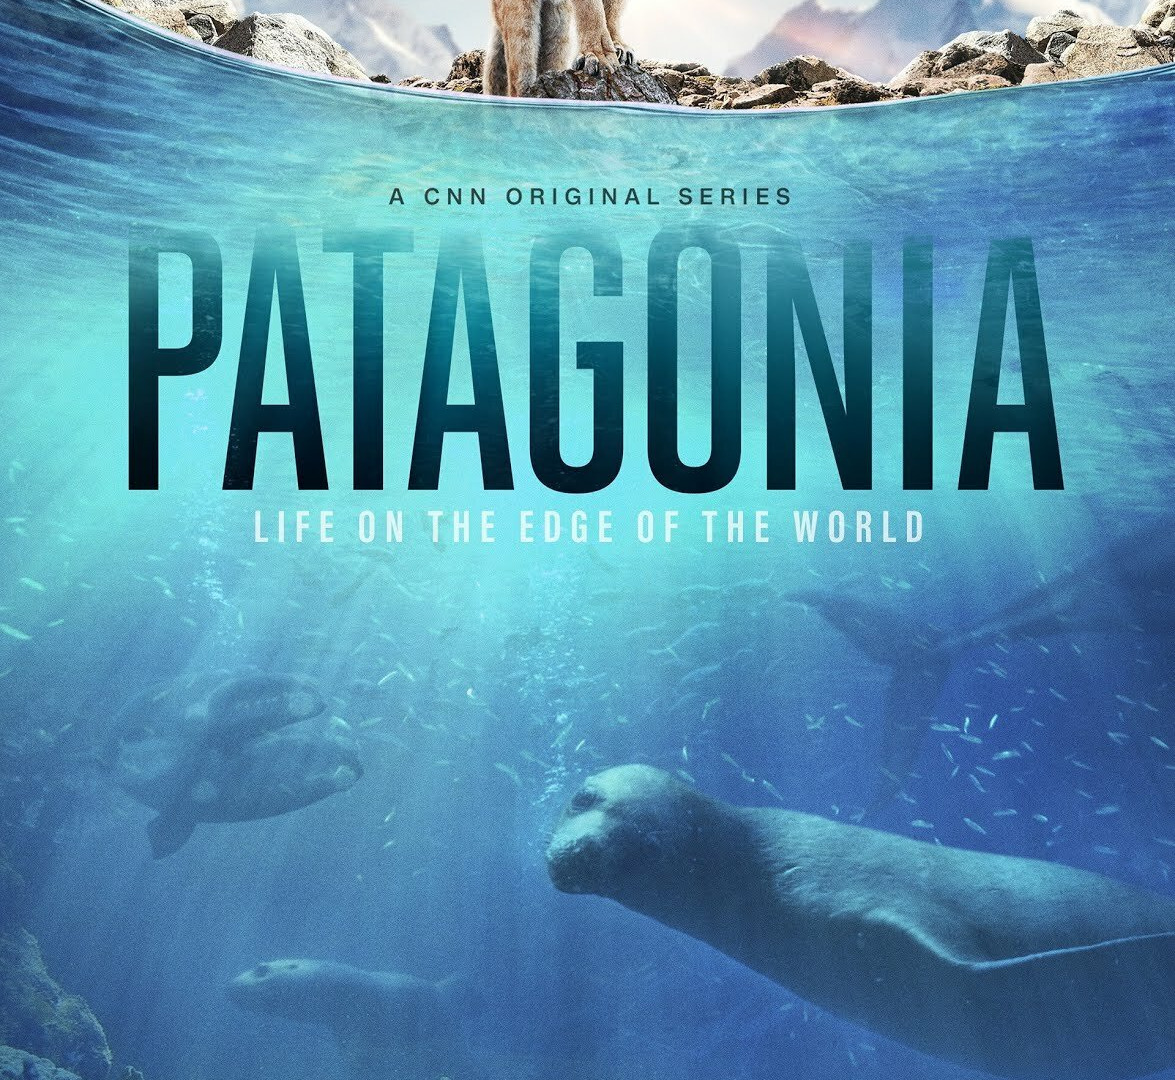 Show Patagonia: Life on the Edge of the World